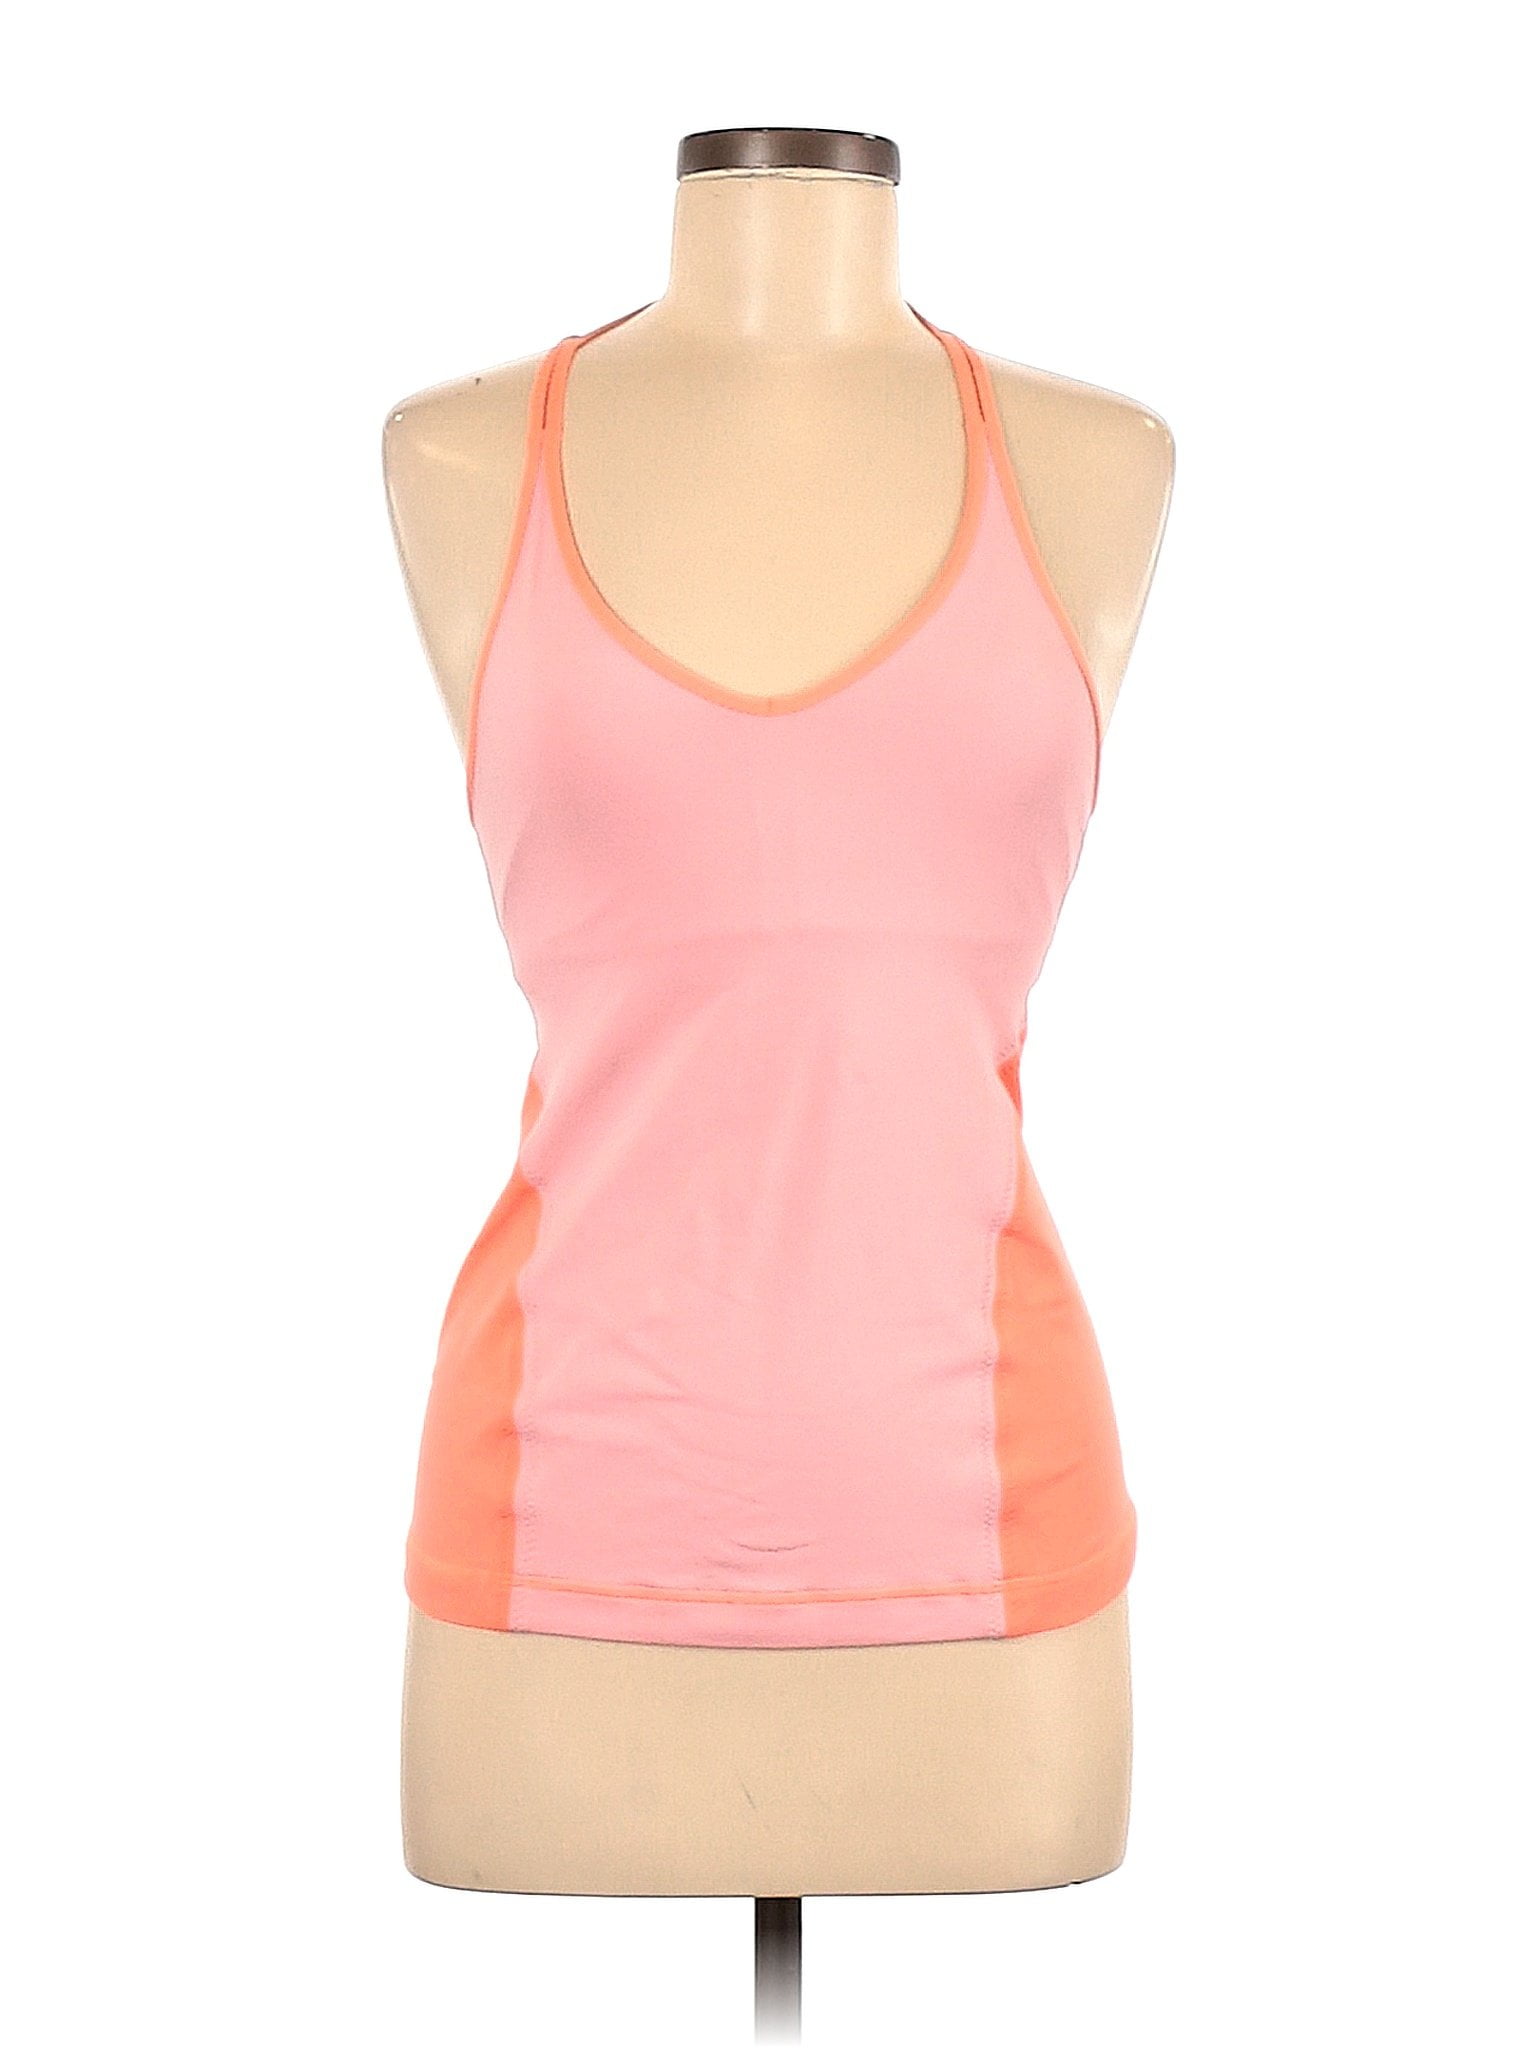 Pre-Owned Lululemon Athletica Womens Size 6 Active Maldives